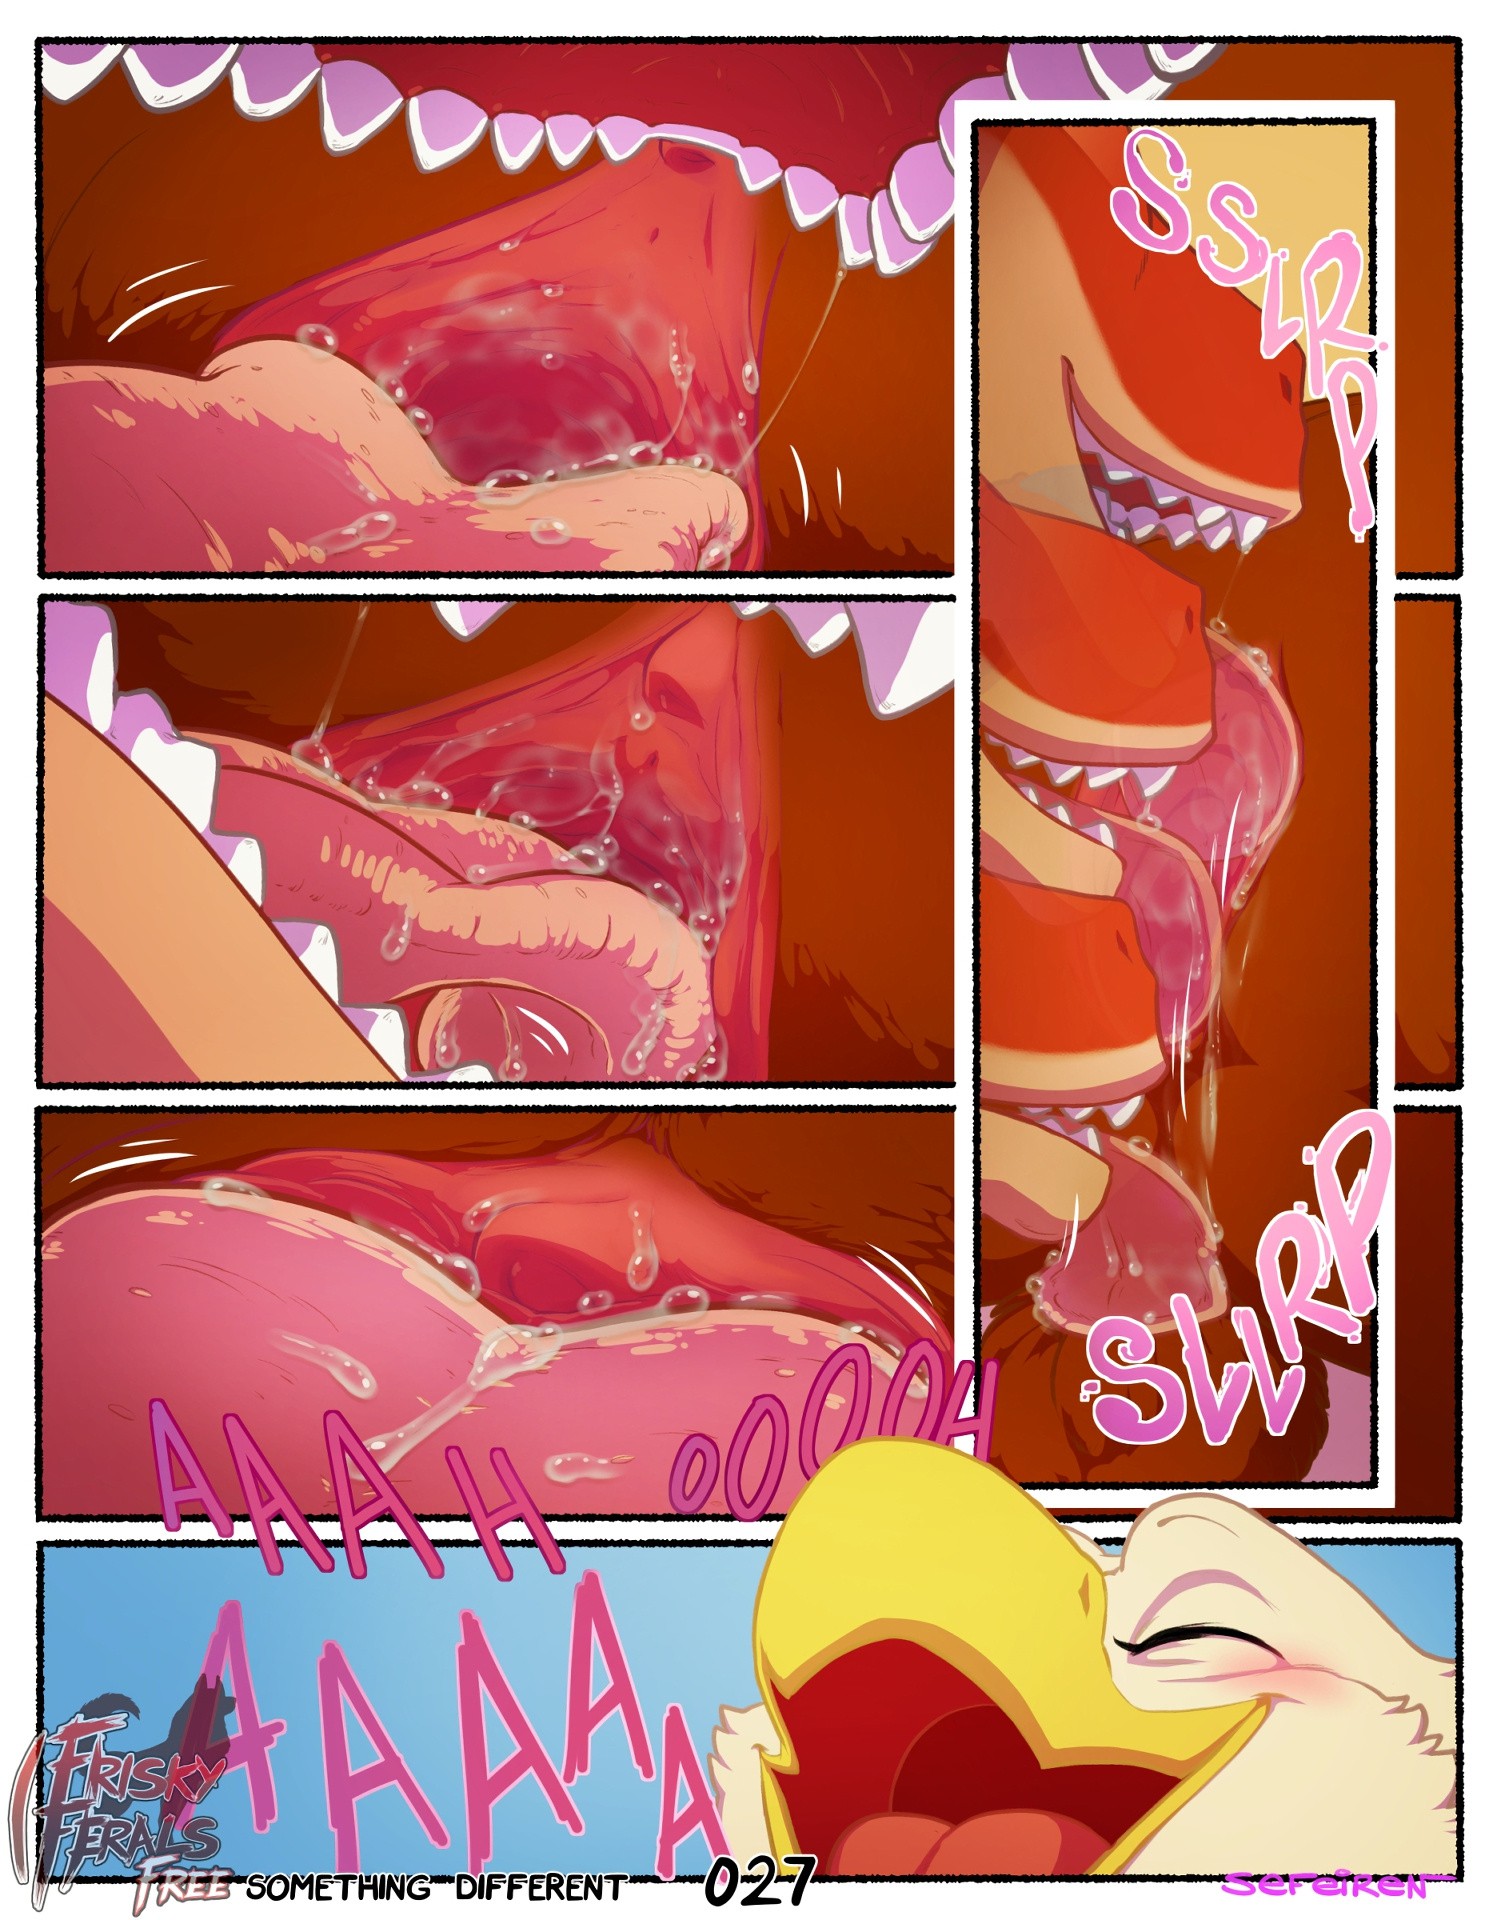 Frisky Ferals - Something Different porn comic picture 27